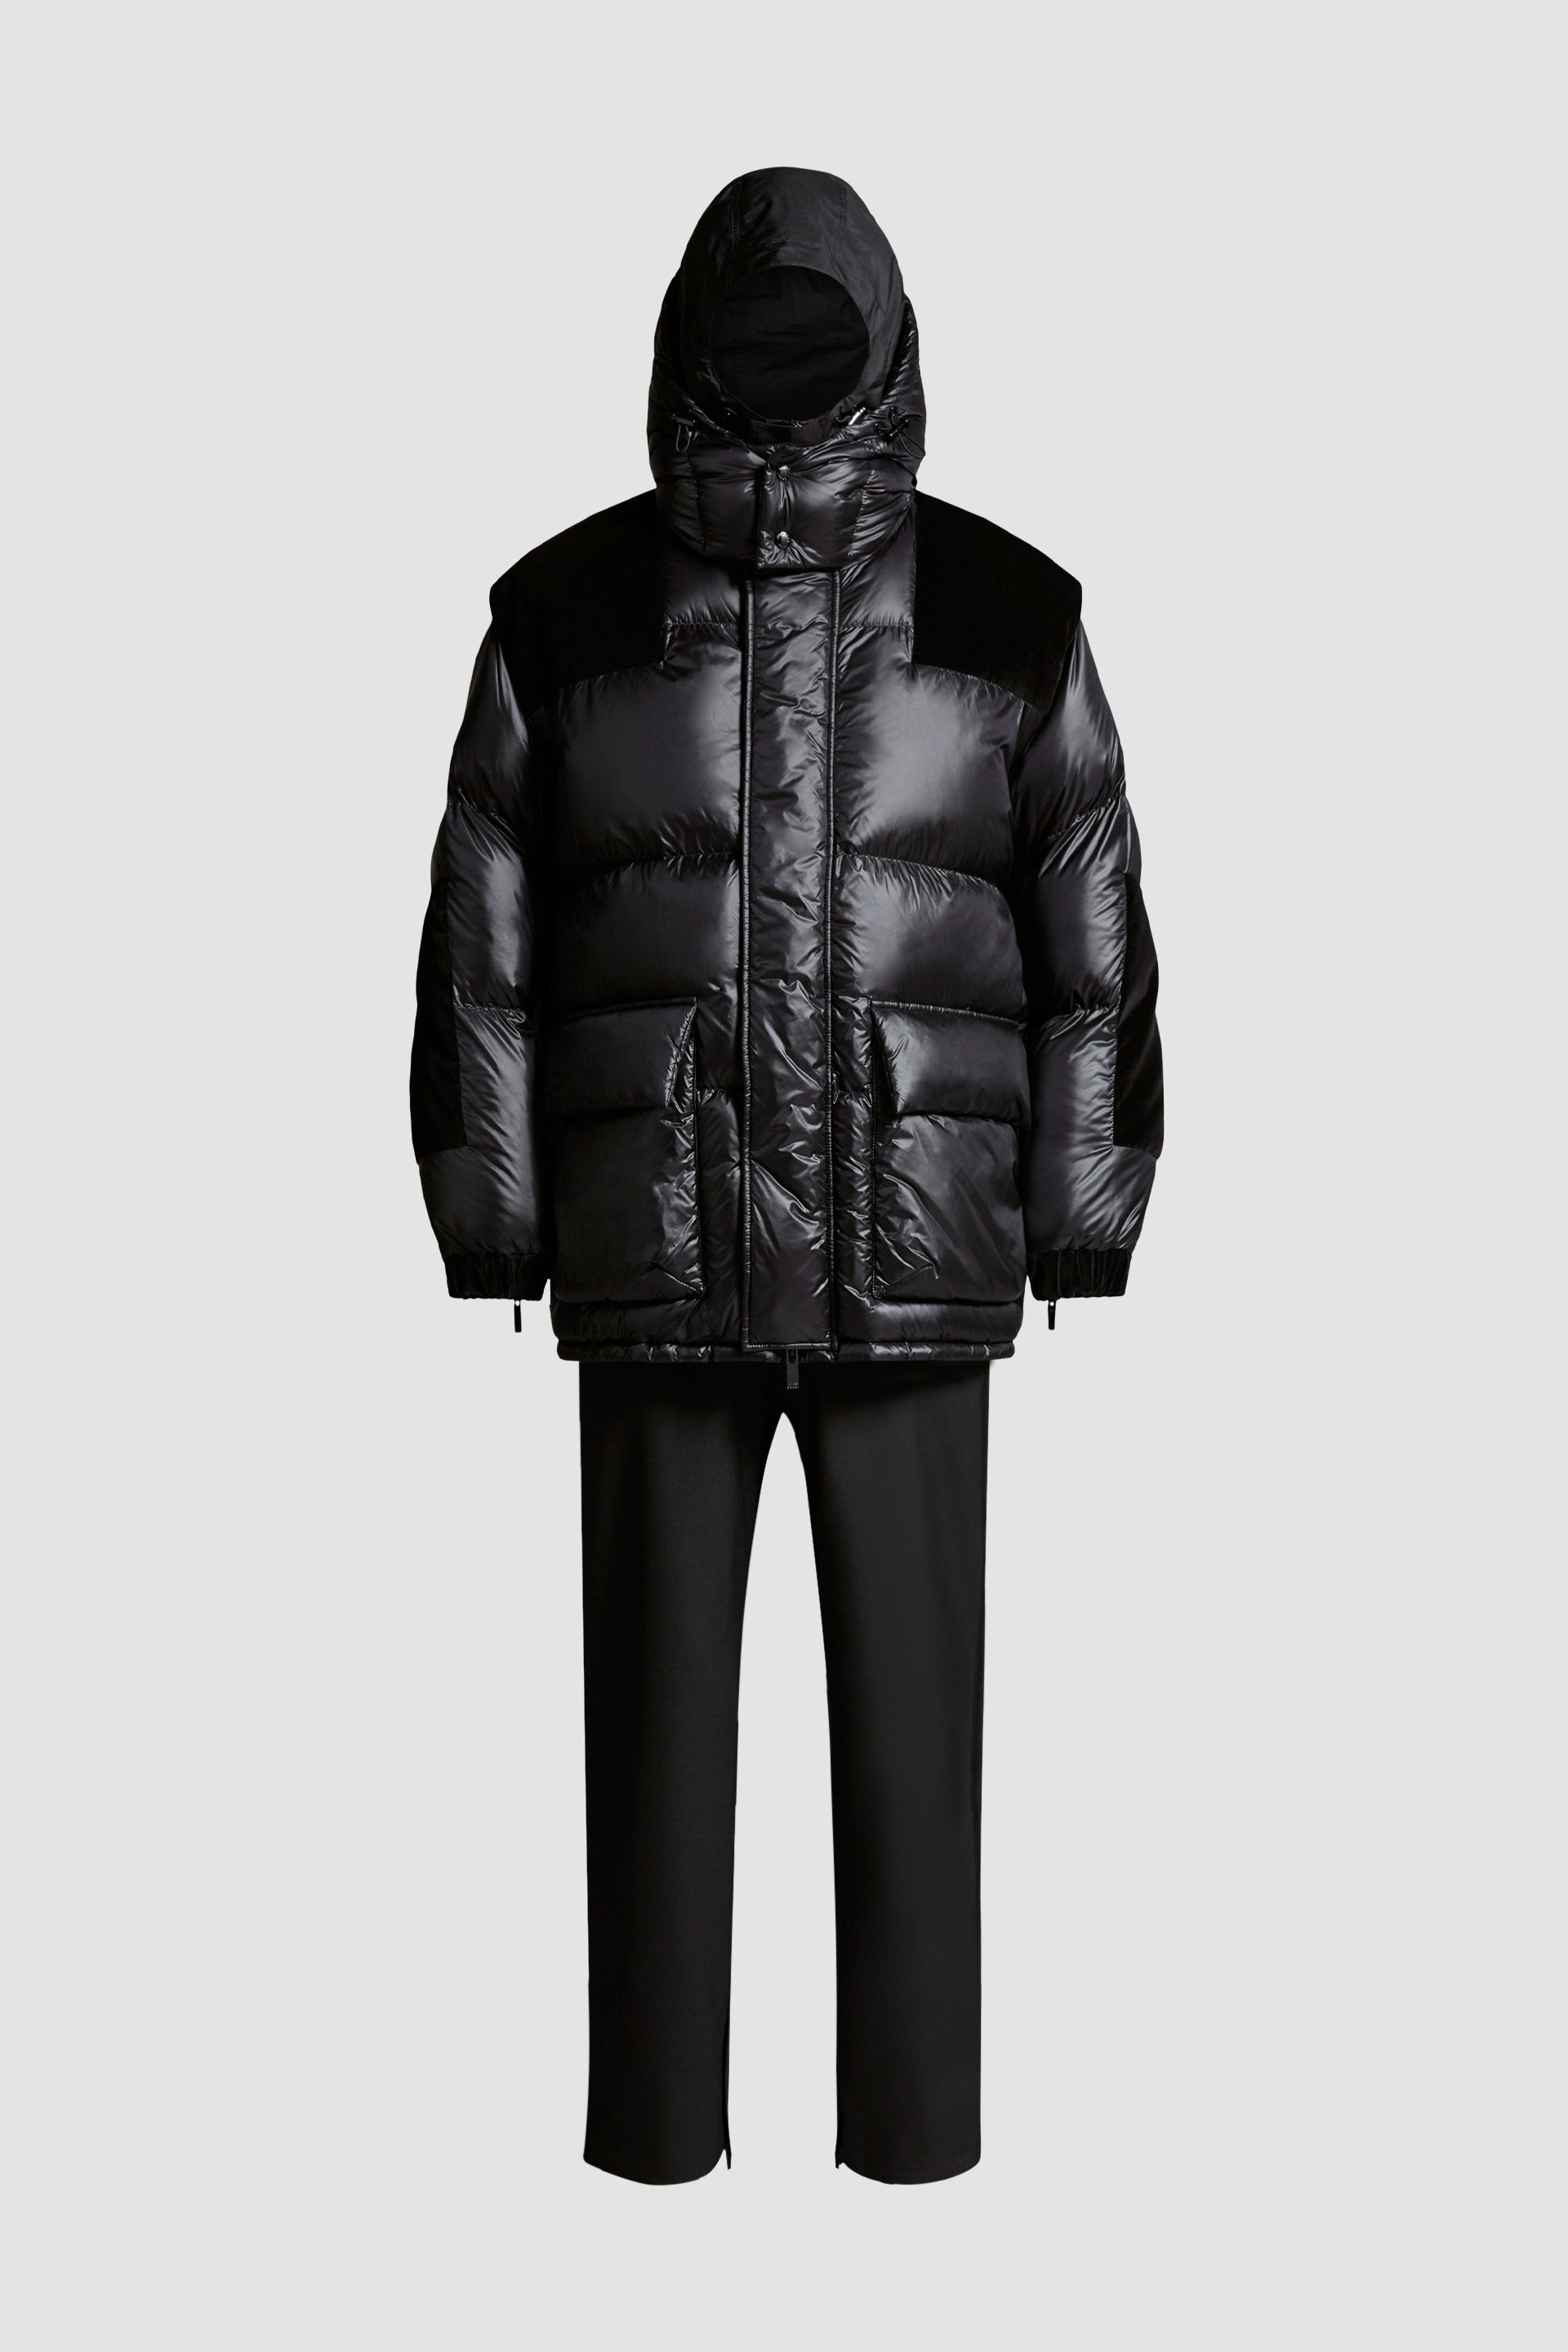 For Special Projects - Moncler x Sacai | Moncler BE